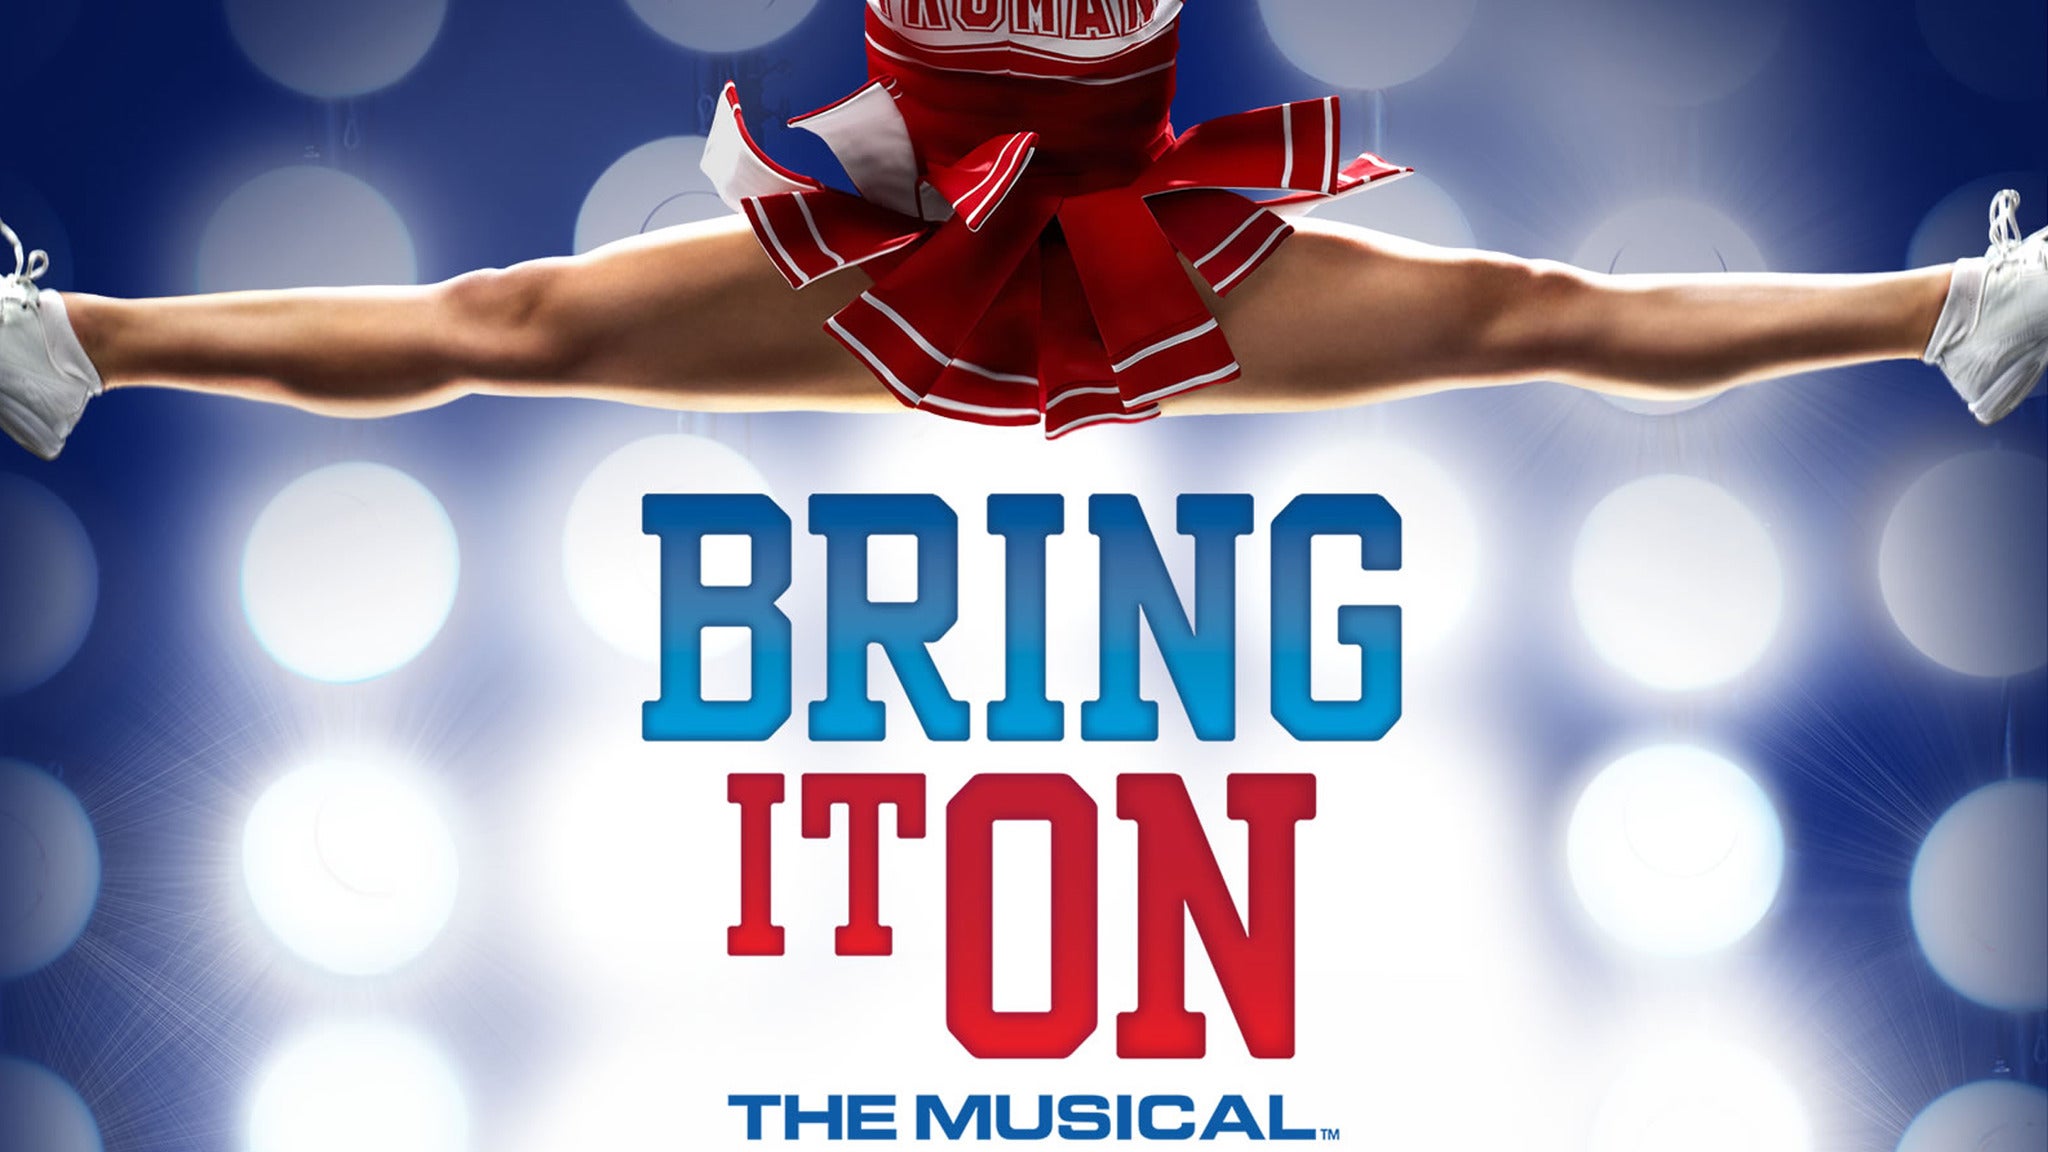 Bring It On: the Musical